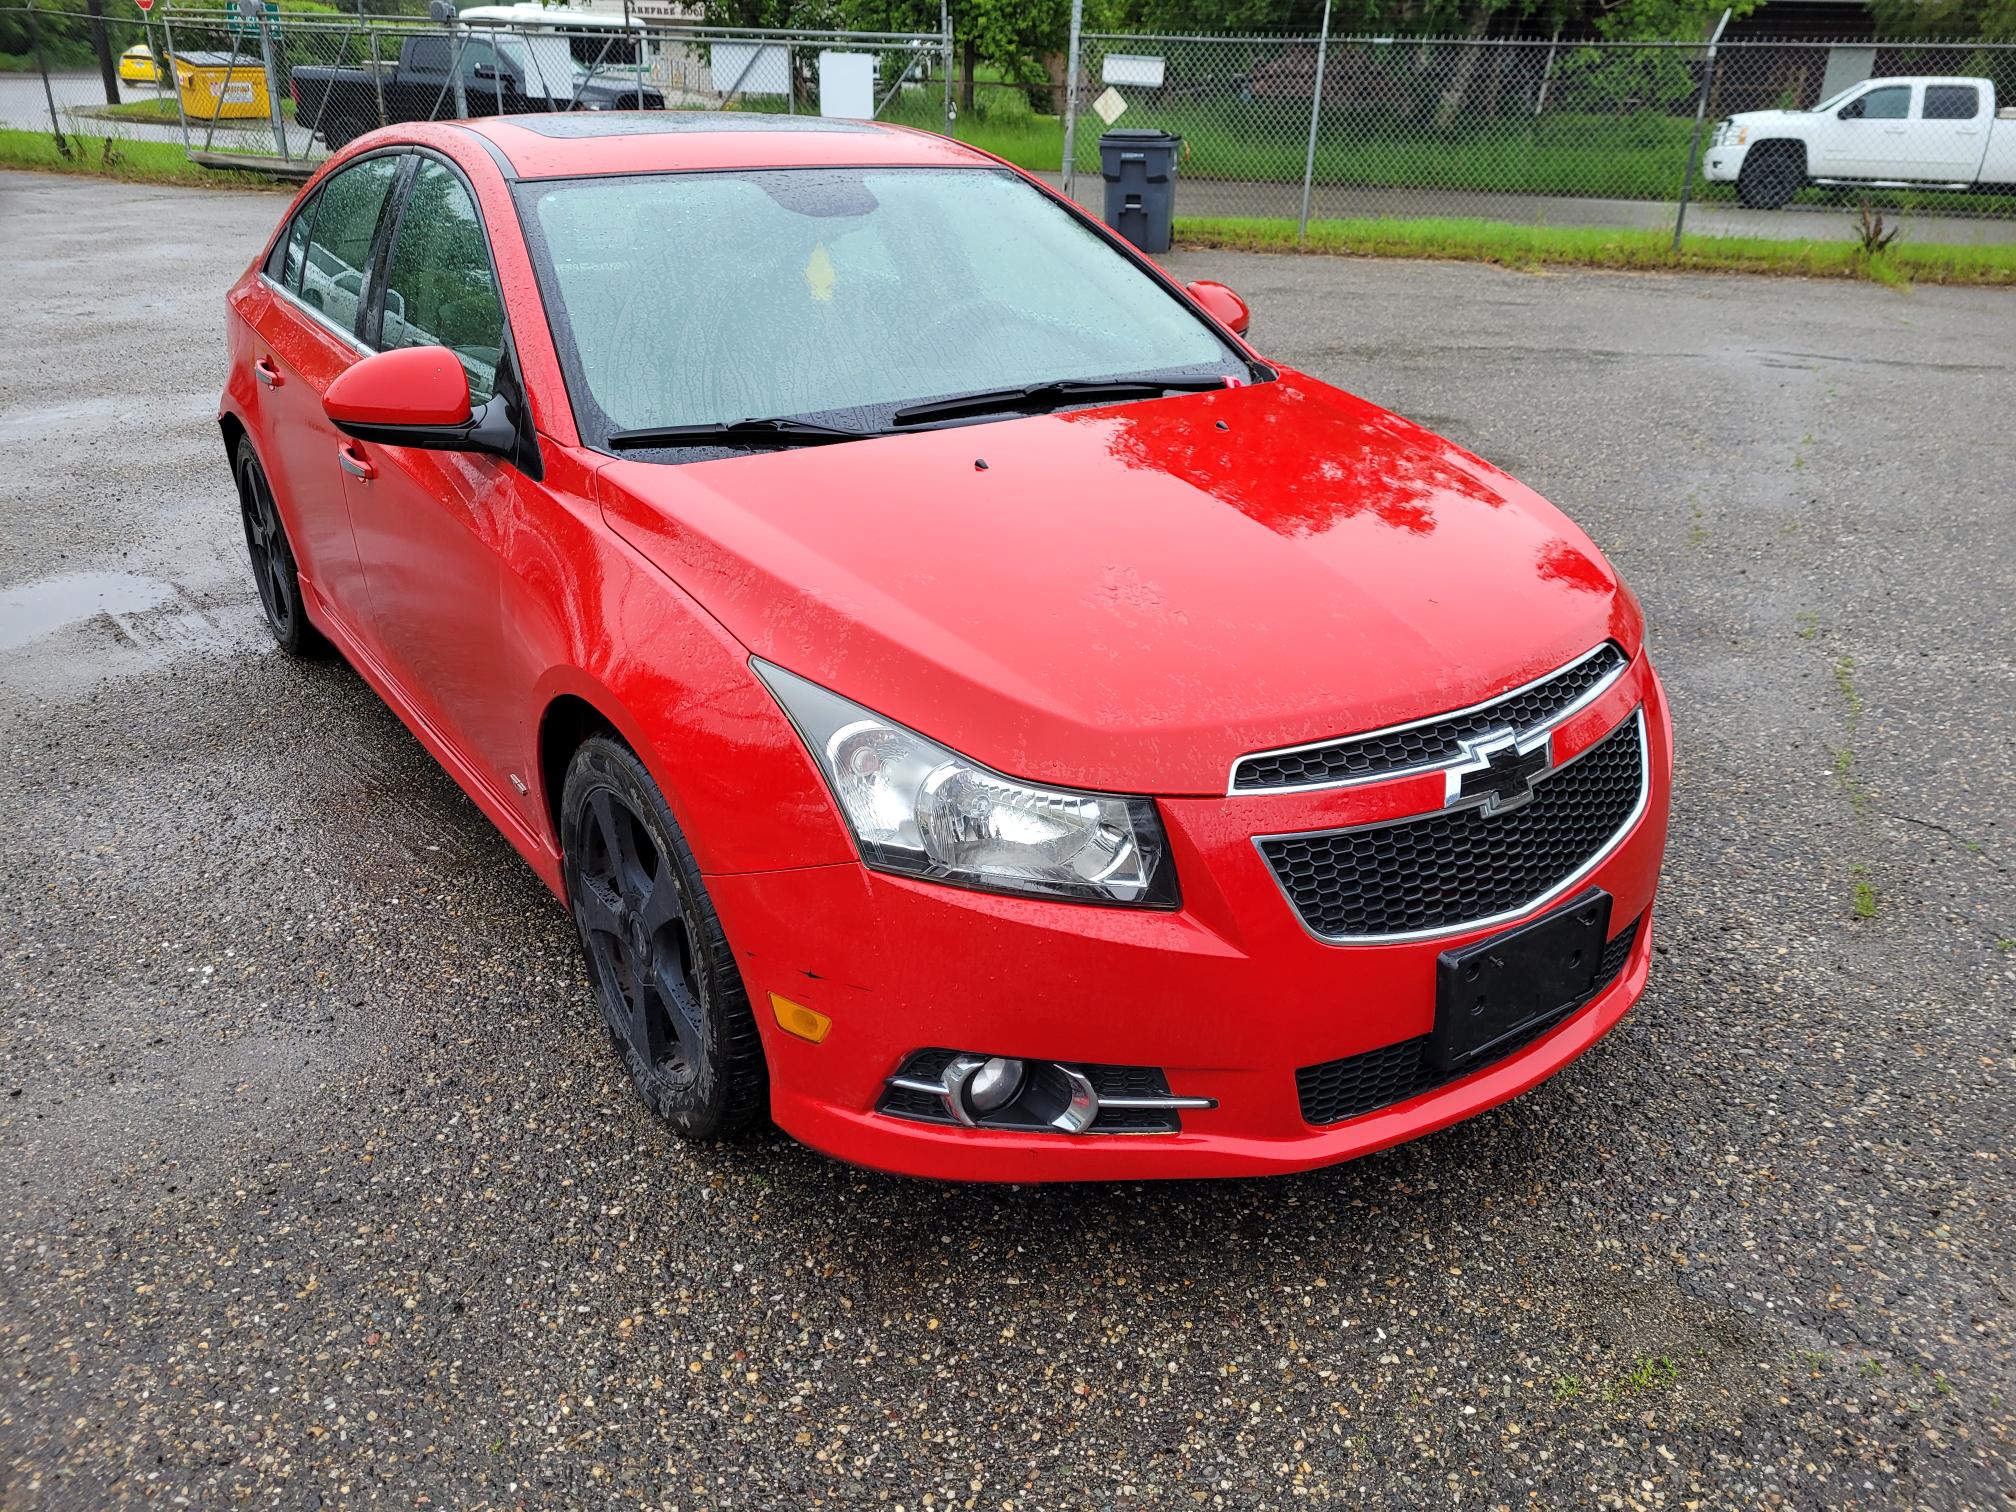 2013 Chevrolet Cruze LTZ RS #B-PG-0609 Located in Prince George